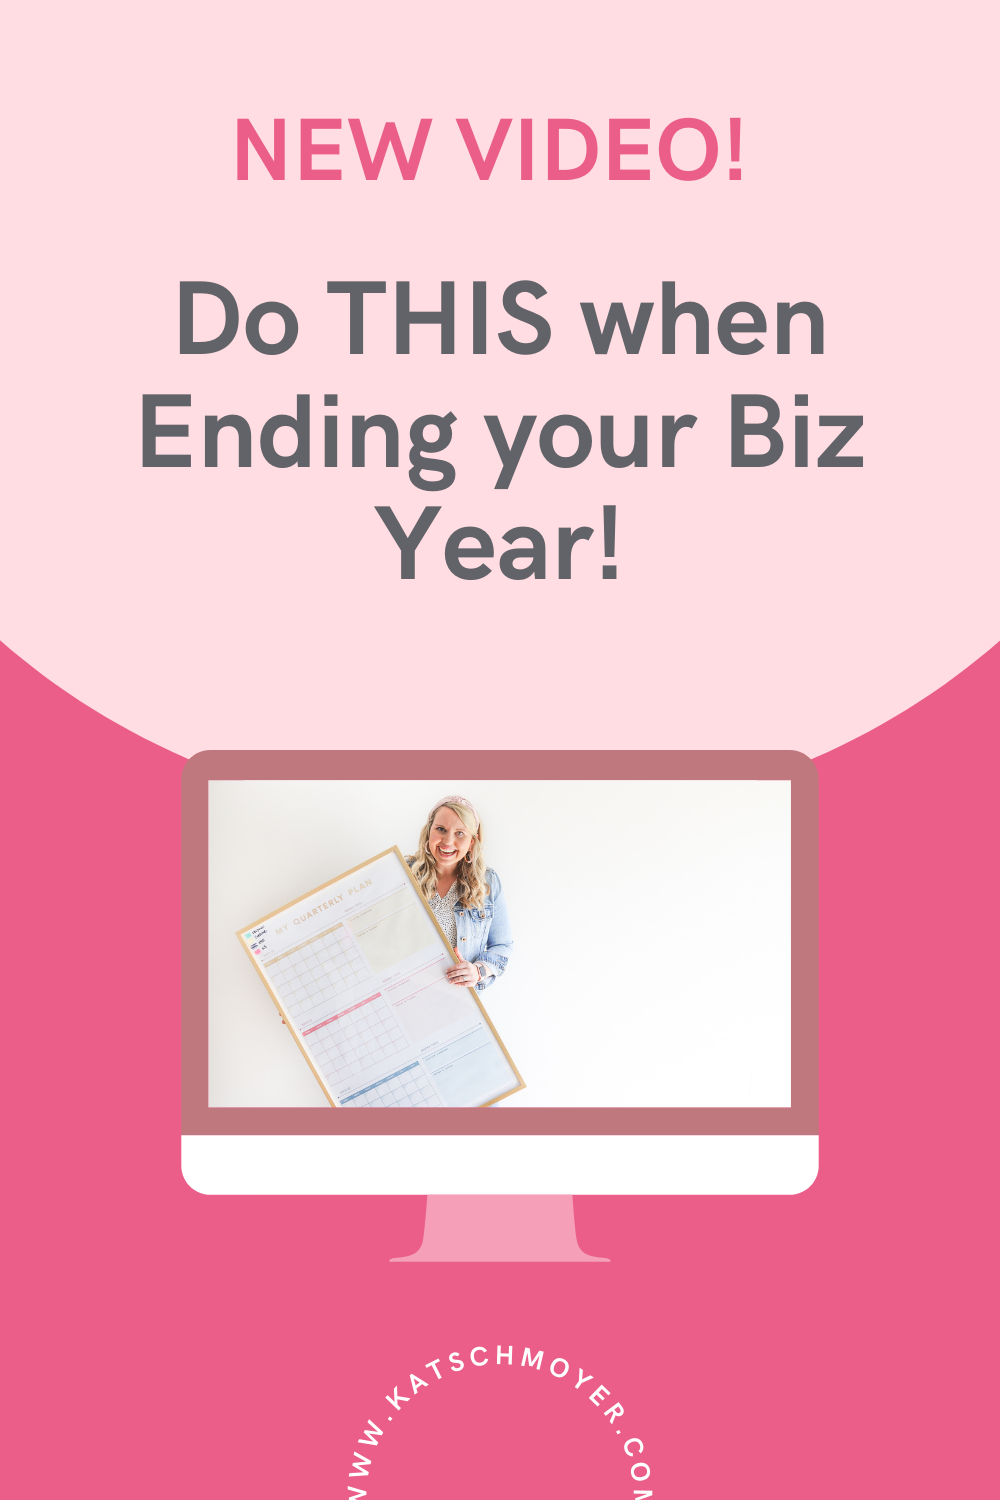 Do THIS when Ending your Biz Year